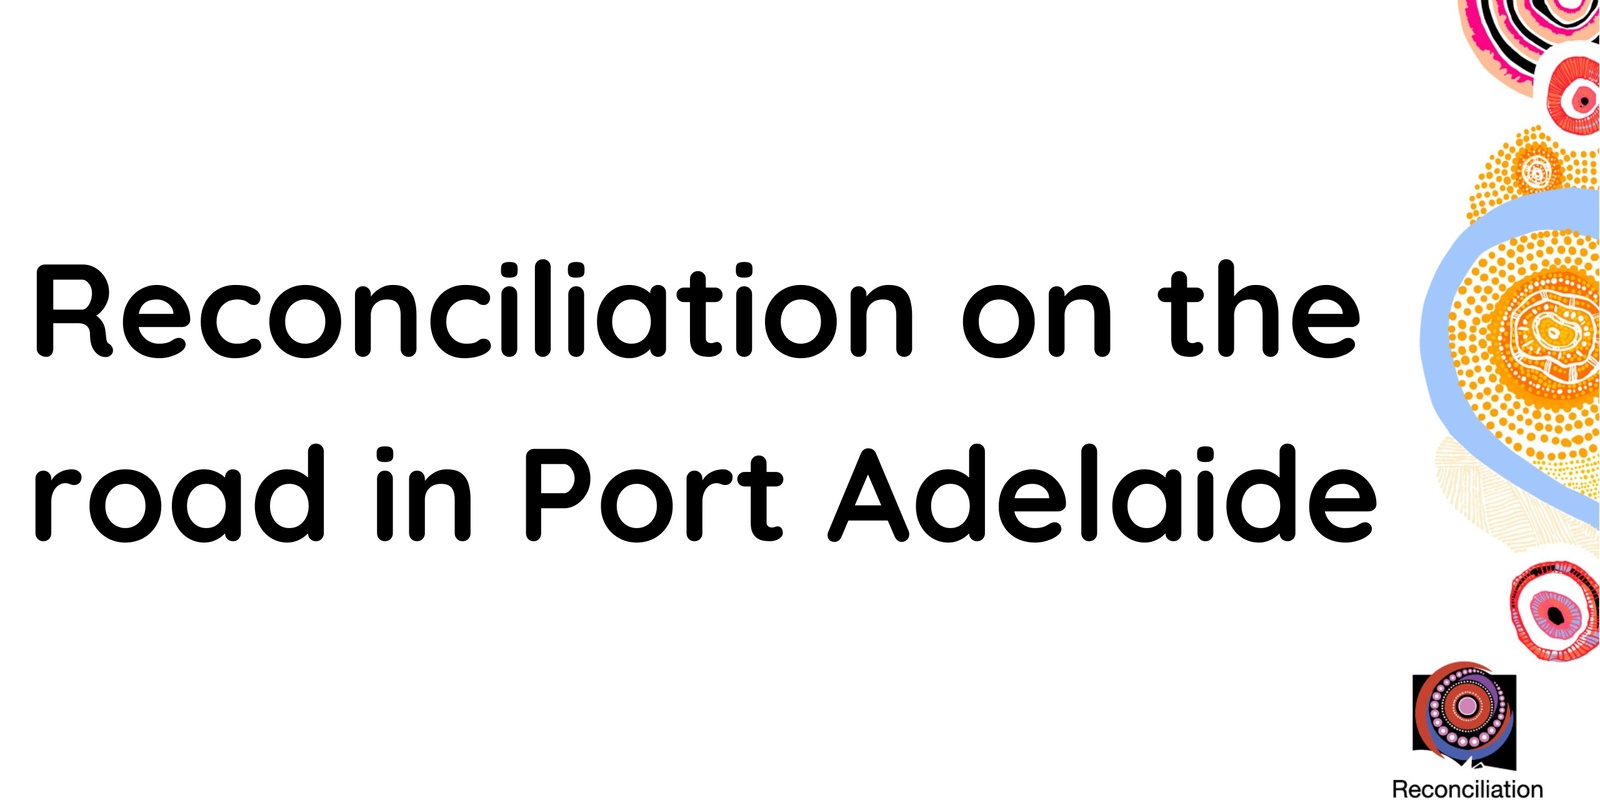 Banner image for Reconciliation on the road - Port Adelaide